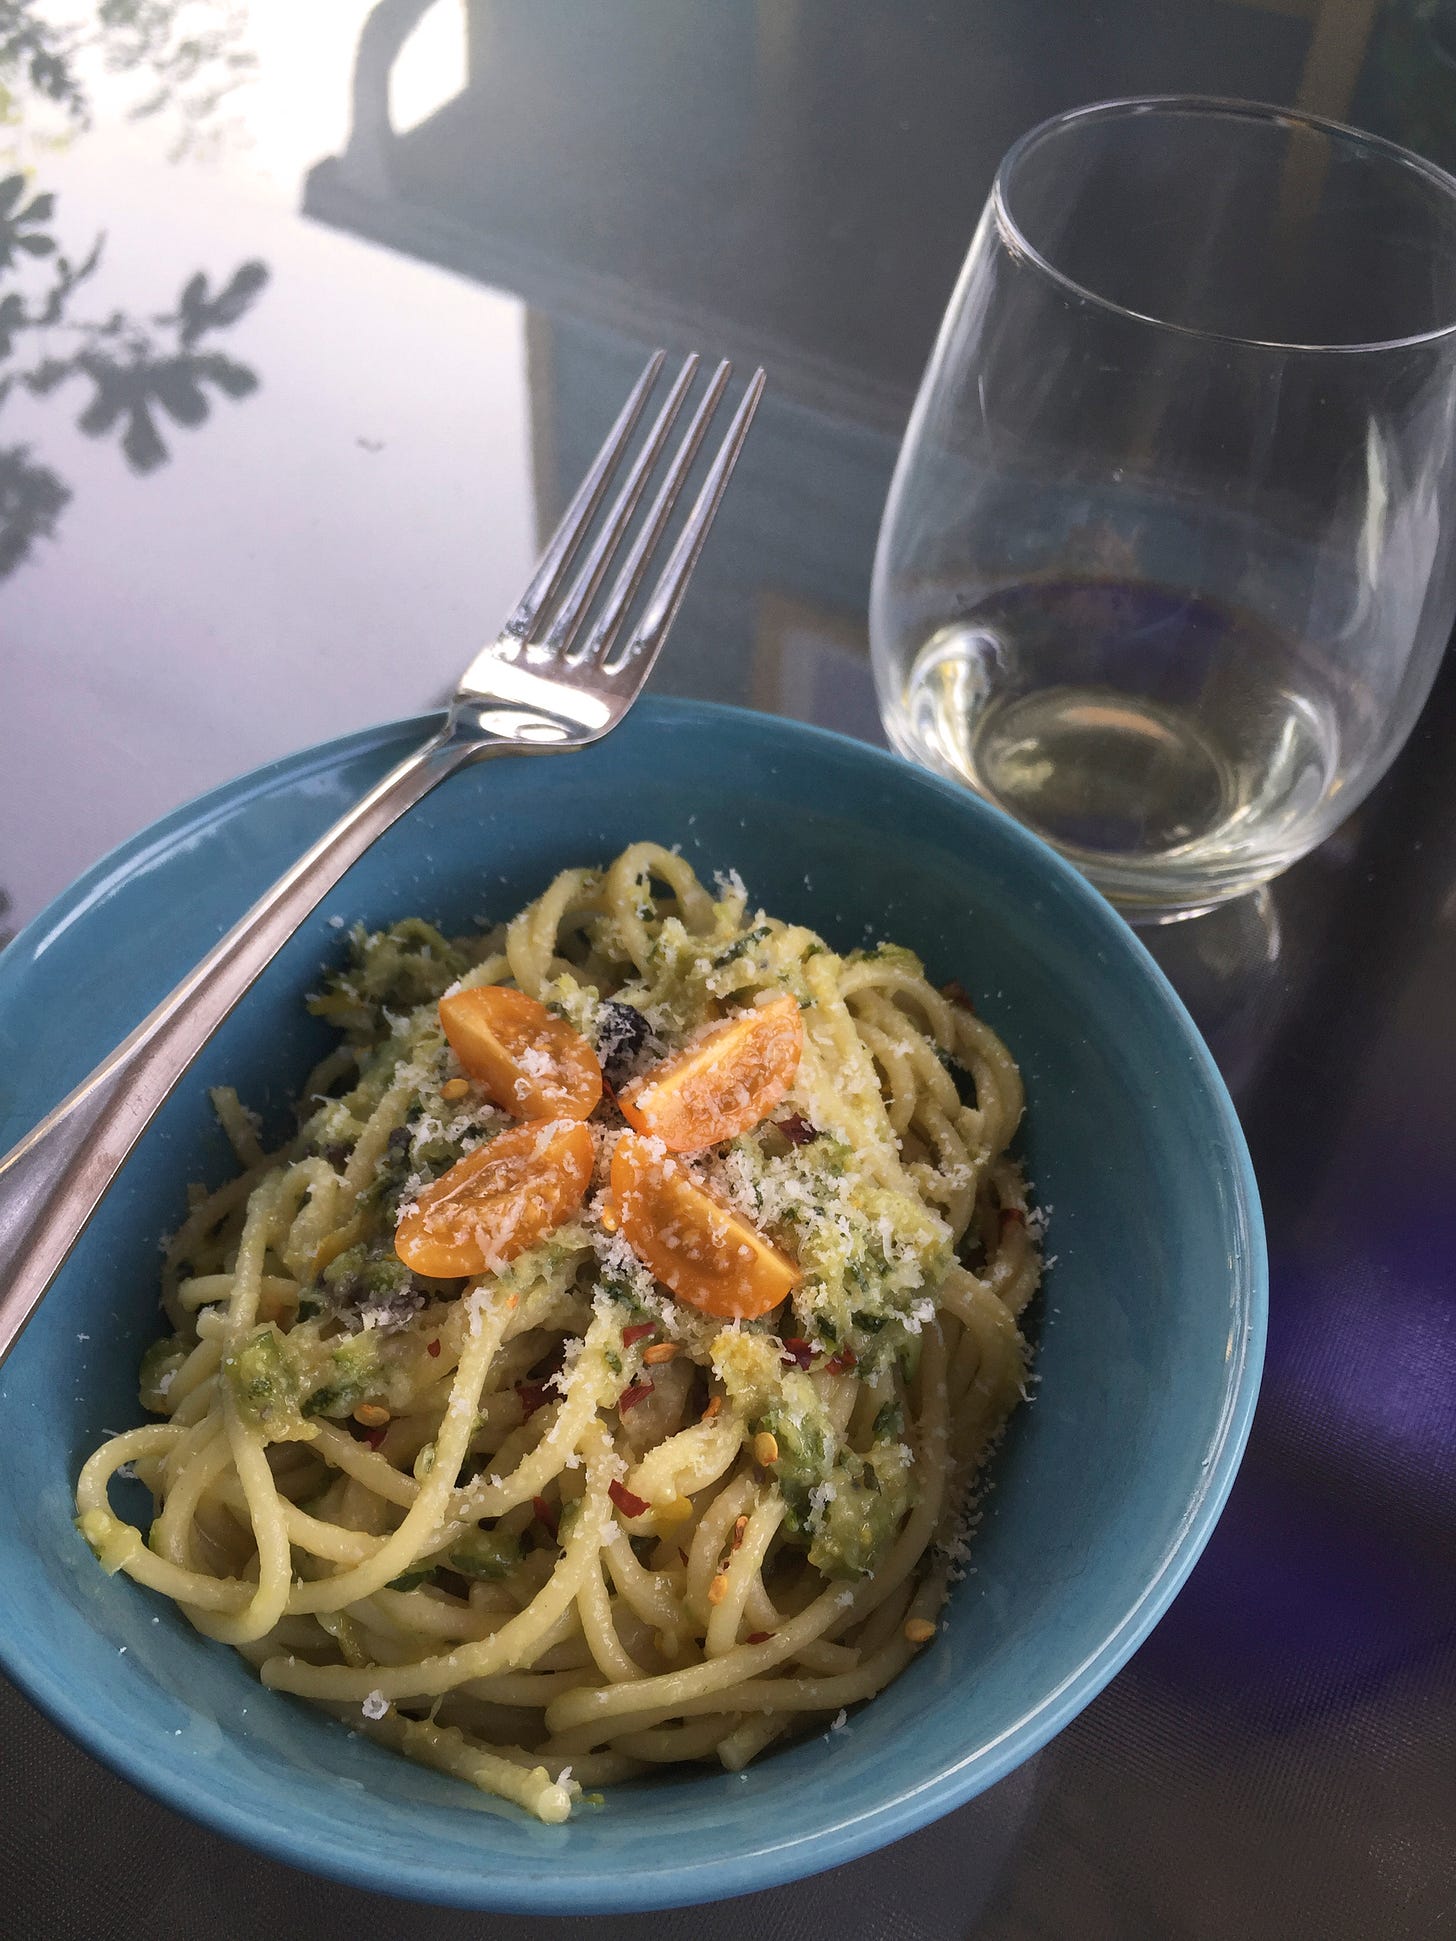 A blue bowl of spaghetti in a zucchini sauce, with parmesan and a quartered orange grape tomato on top. A glass of white wine is in the background, and a fork rests at the edge of the bowl.